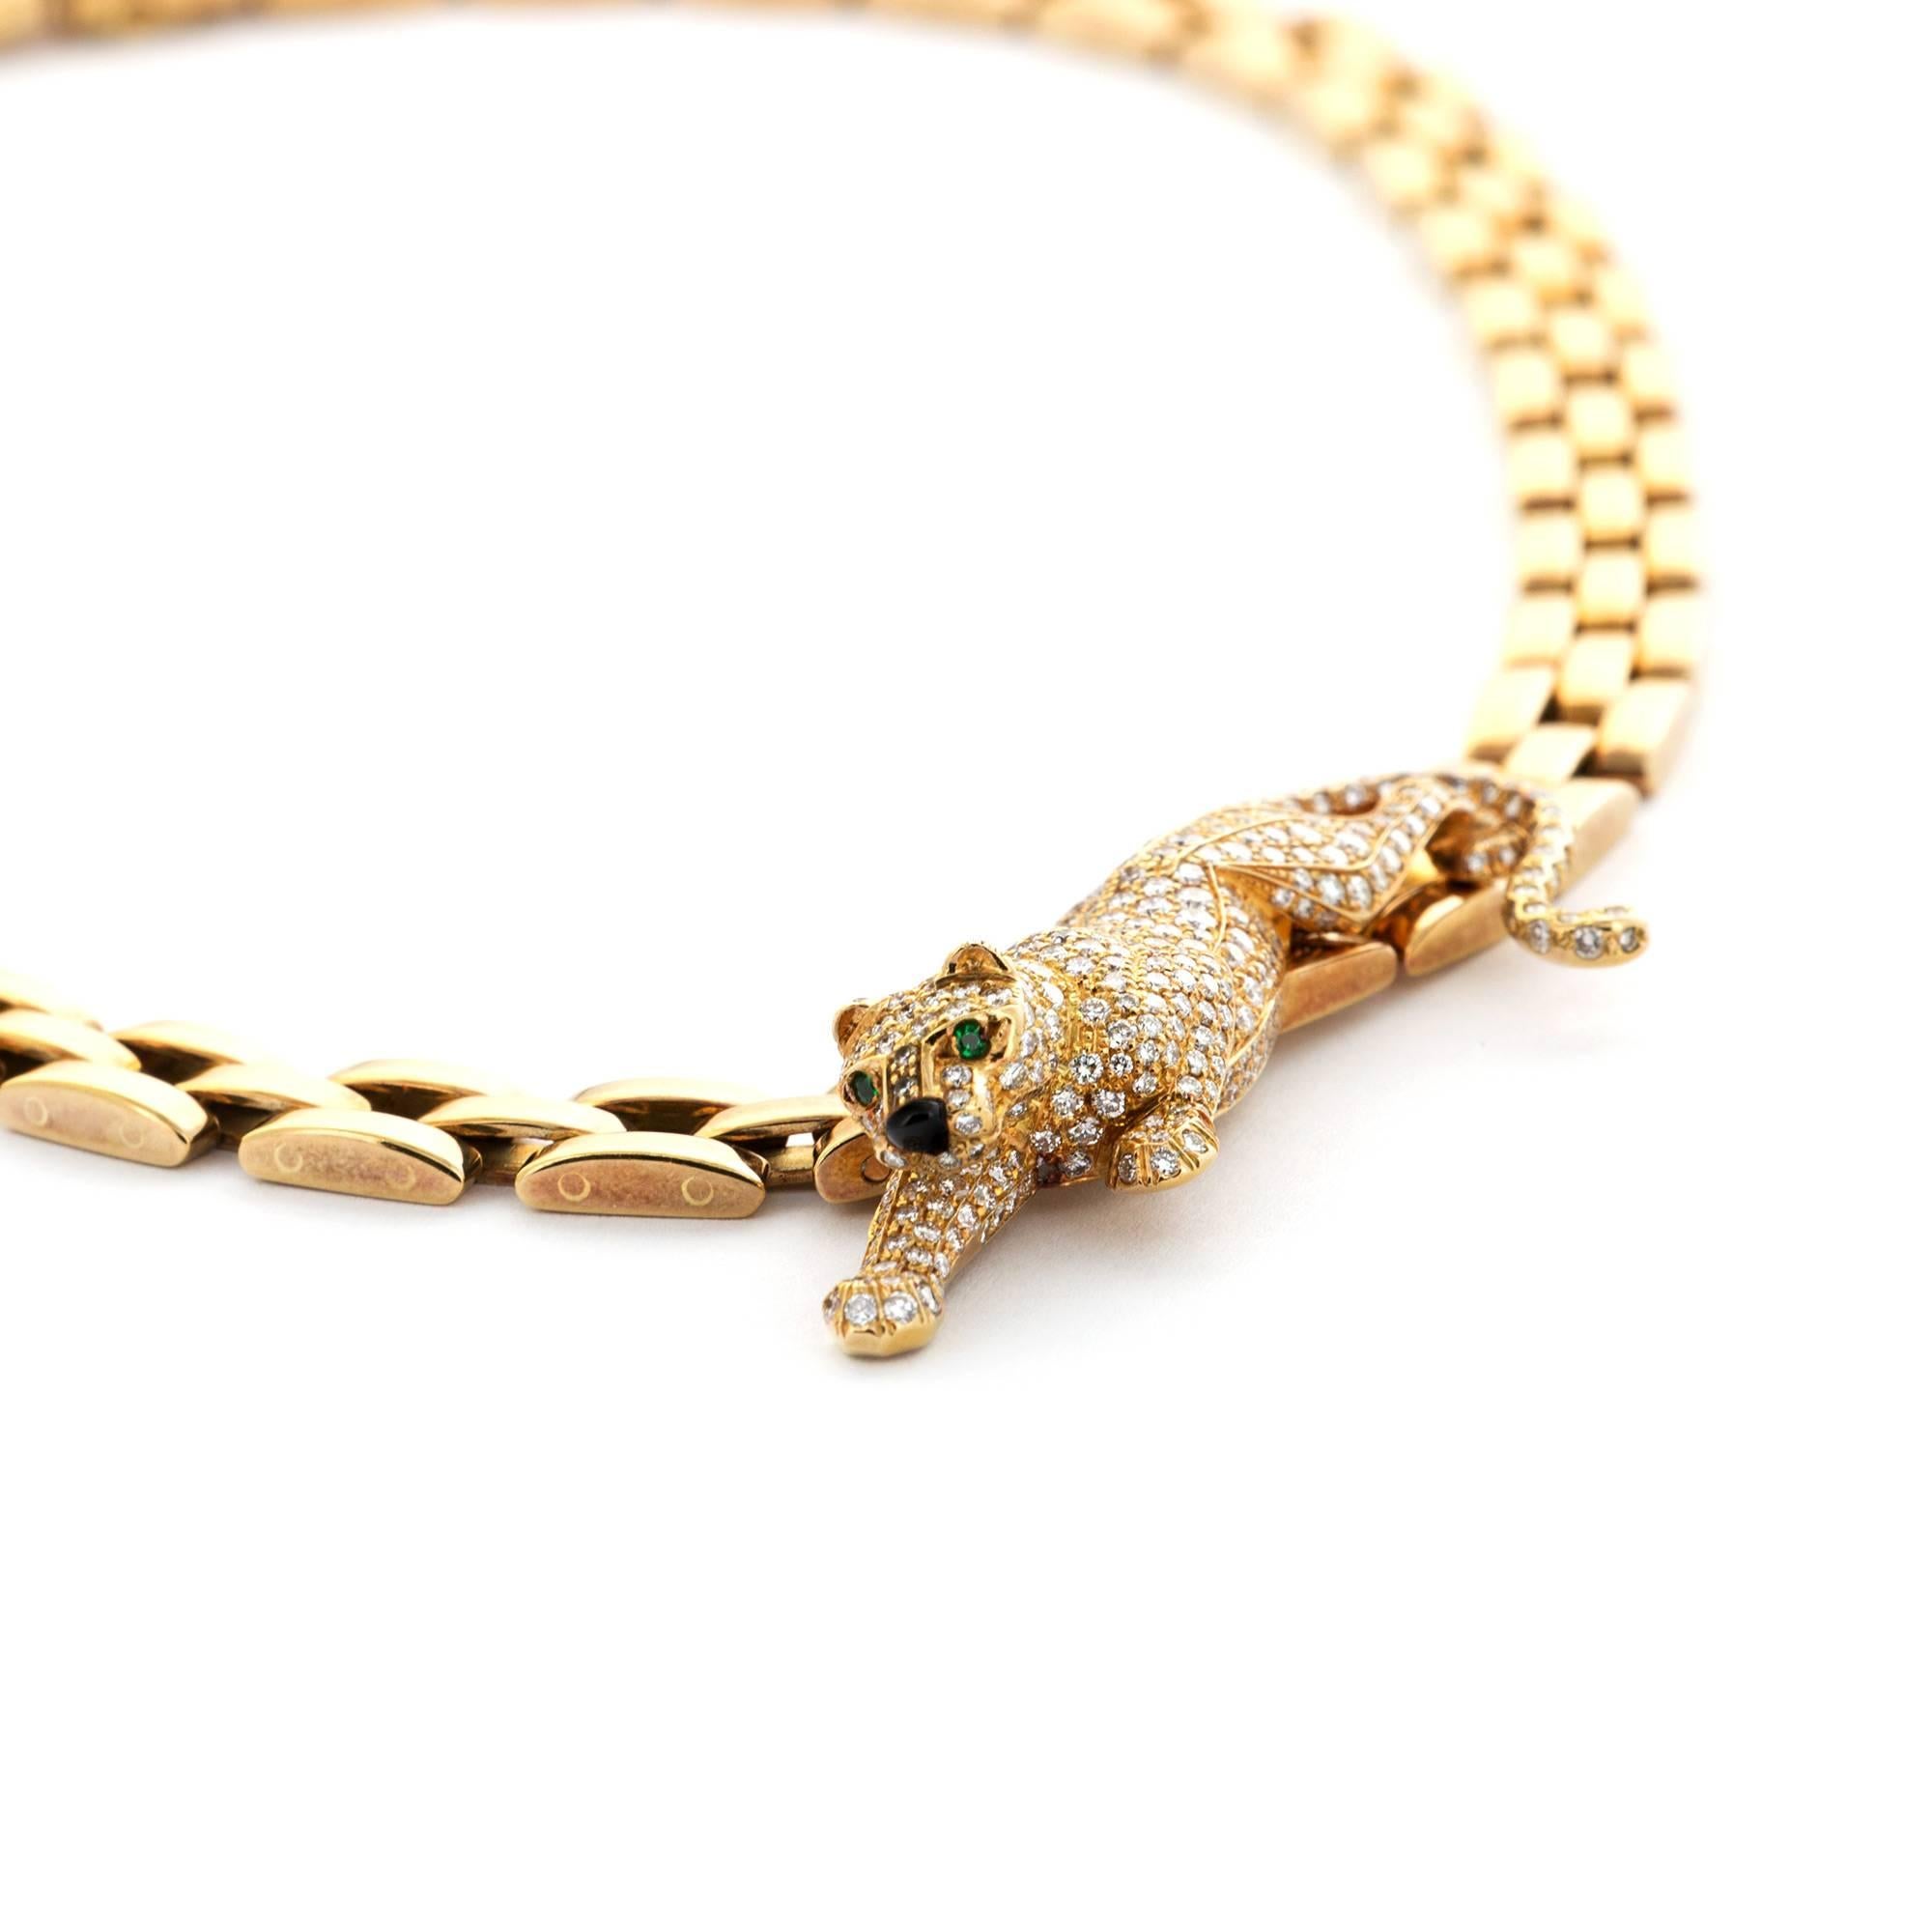 A Cartier "Panthere de Cartier" Pave Diamond Necklace in 18k Yellow Gold. 

Circa 1990's.

